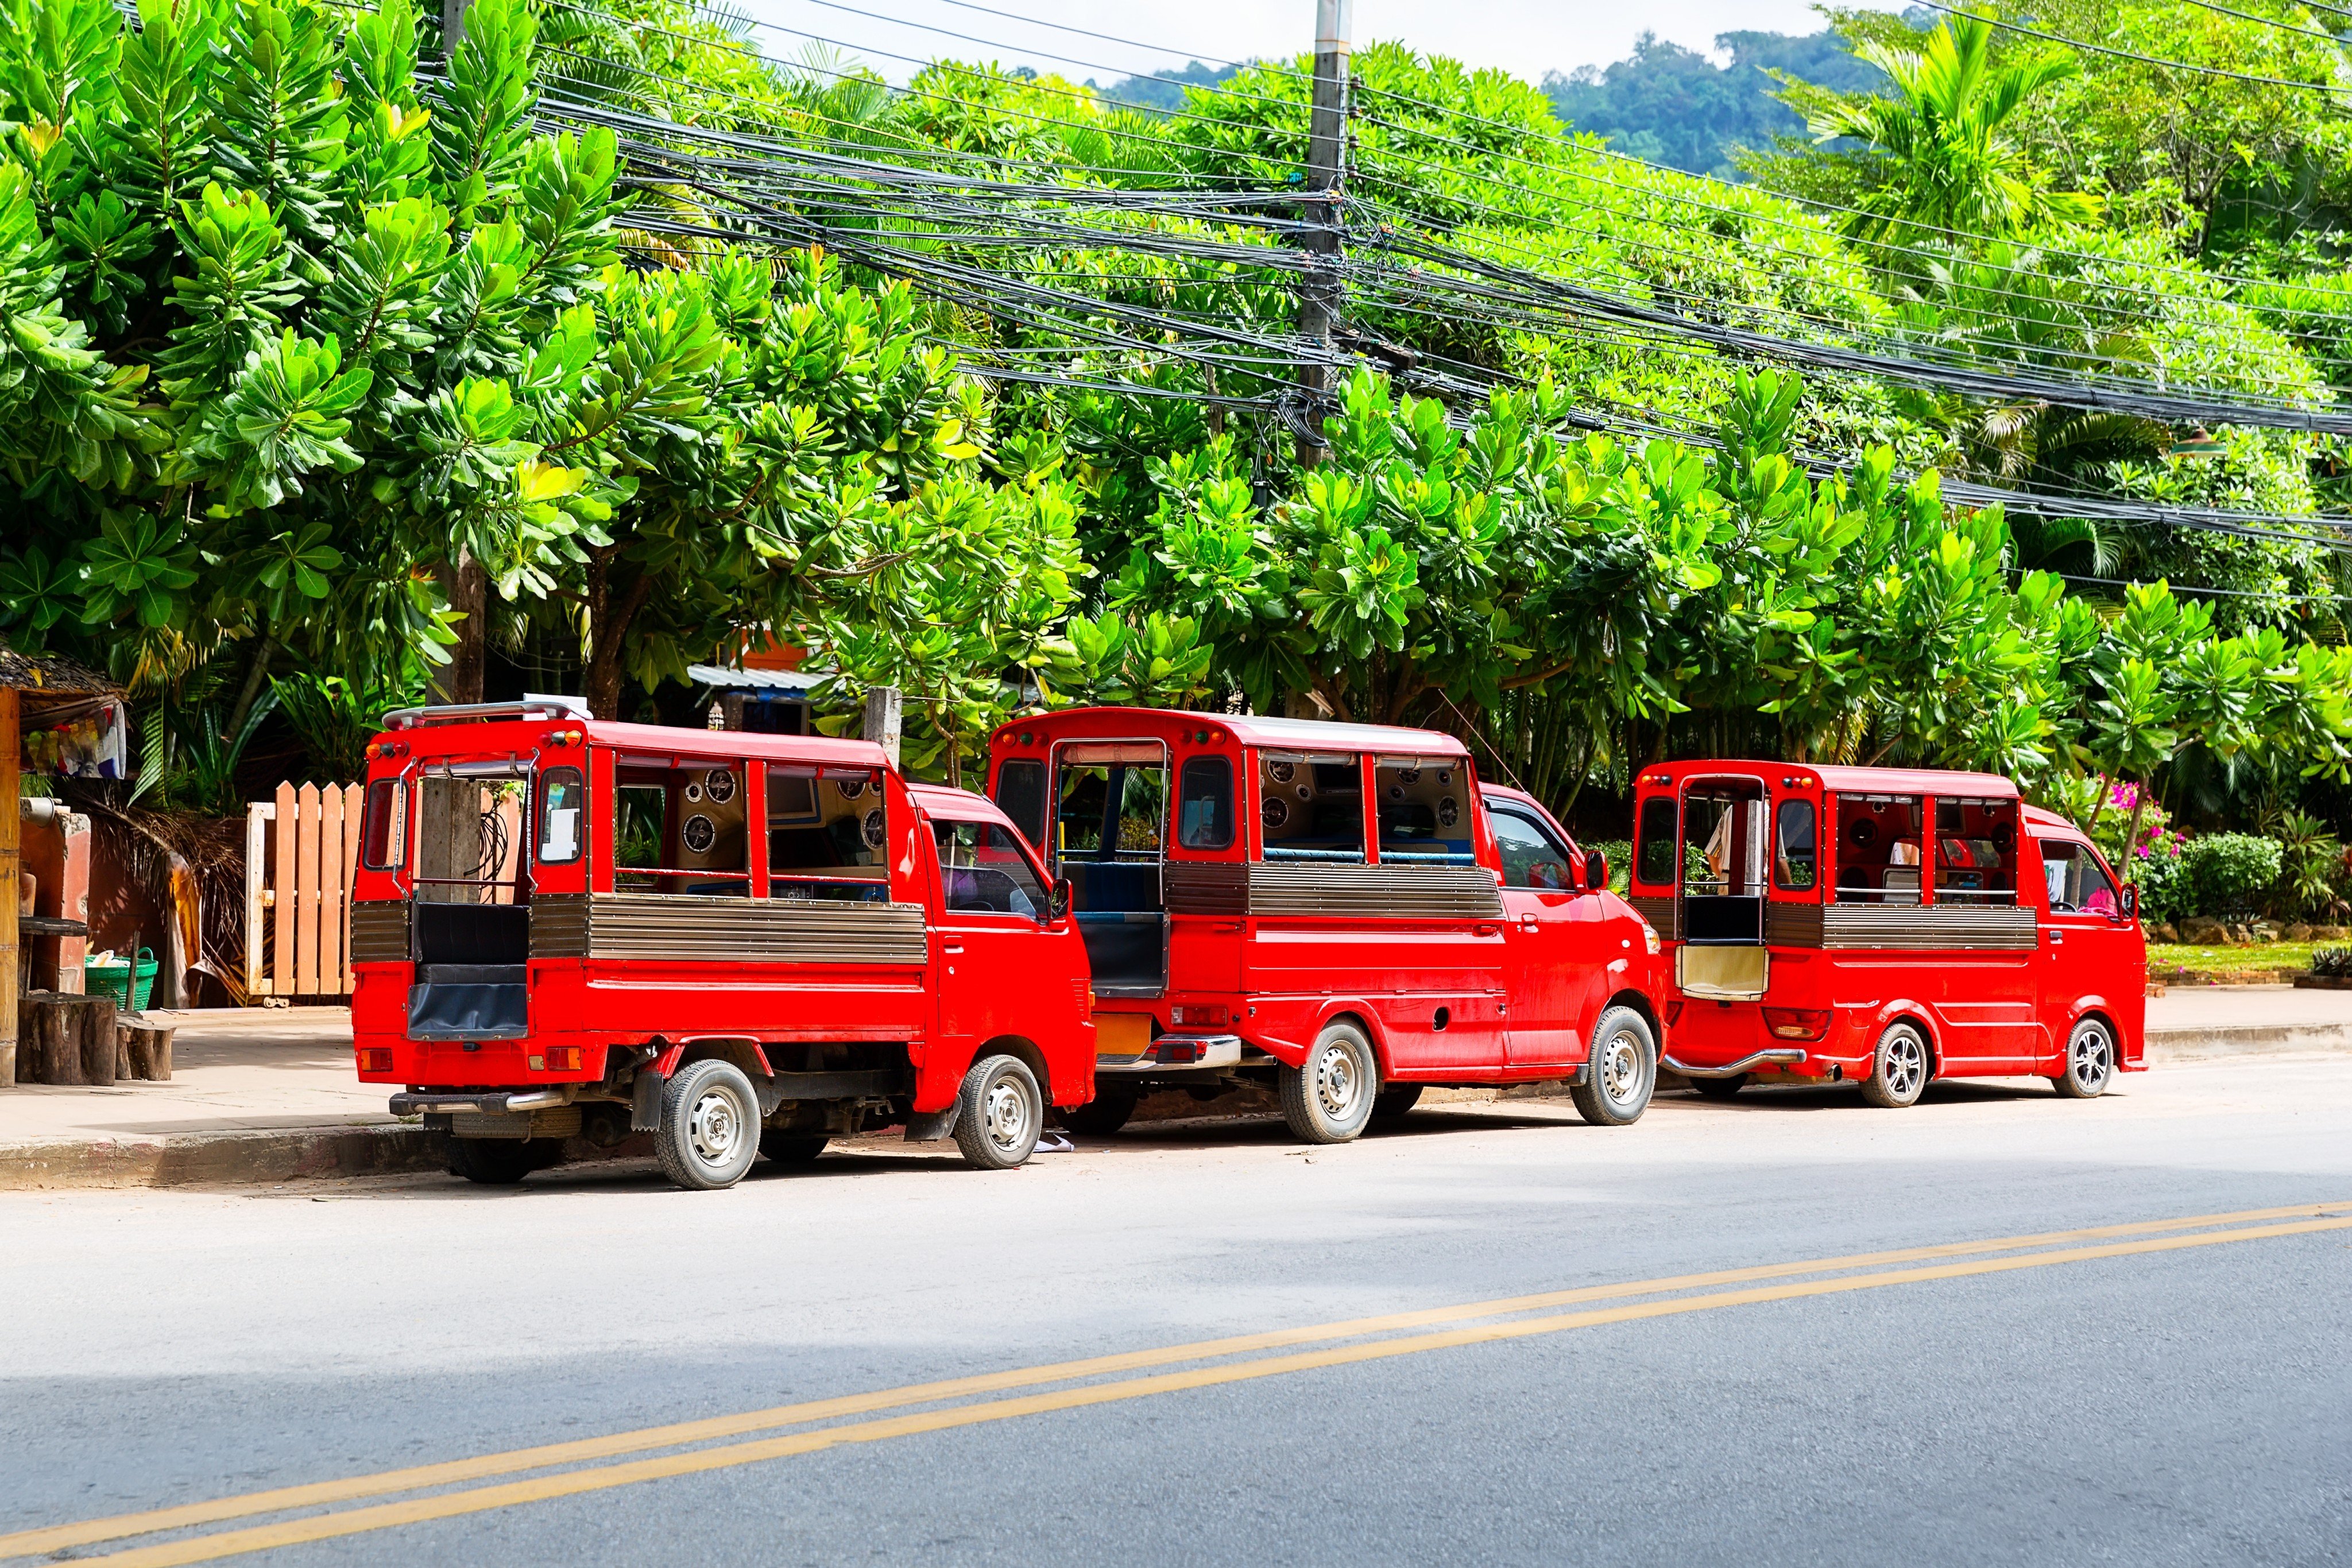 The songthaew are a cheap transport option in Thailand, popular with blue collar workers and students. Photo: Shutterstock